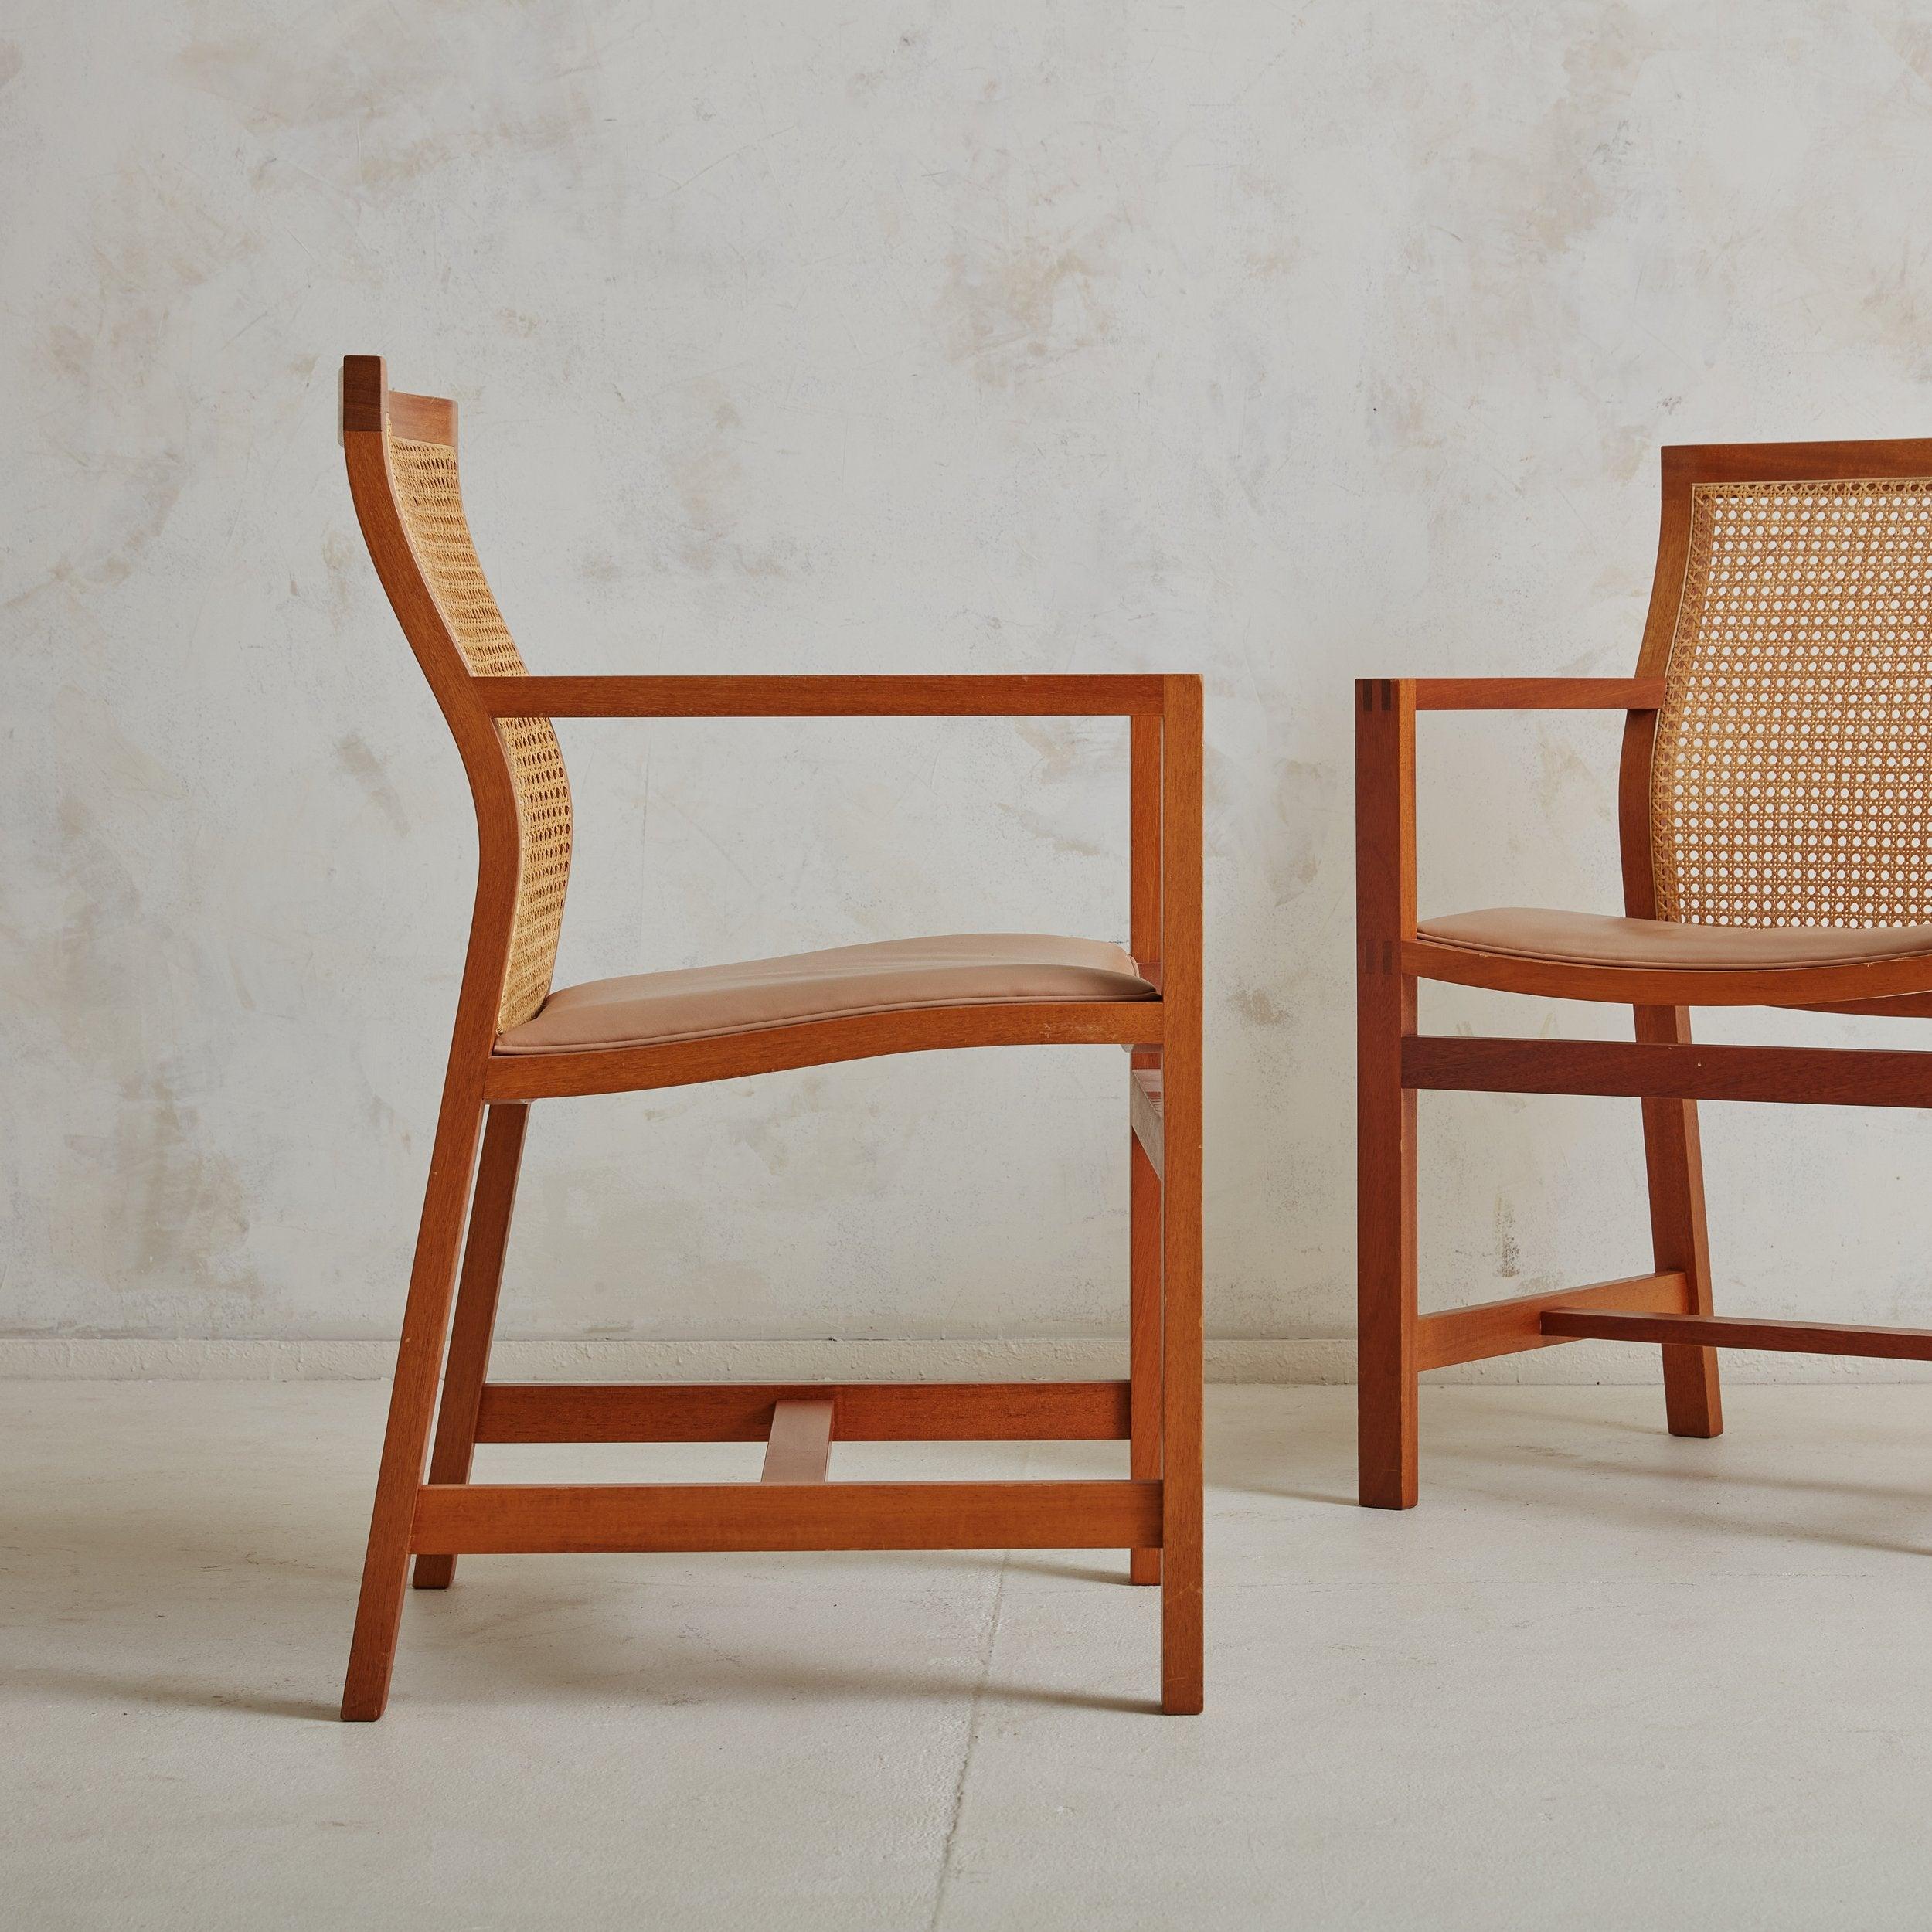 Danish Set of 6 Cane Dining Chairs by Rud Thygesen and Johnny Sorensen for Botium 1980s For Sale